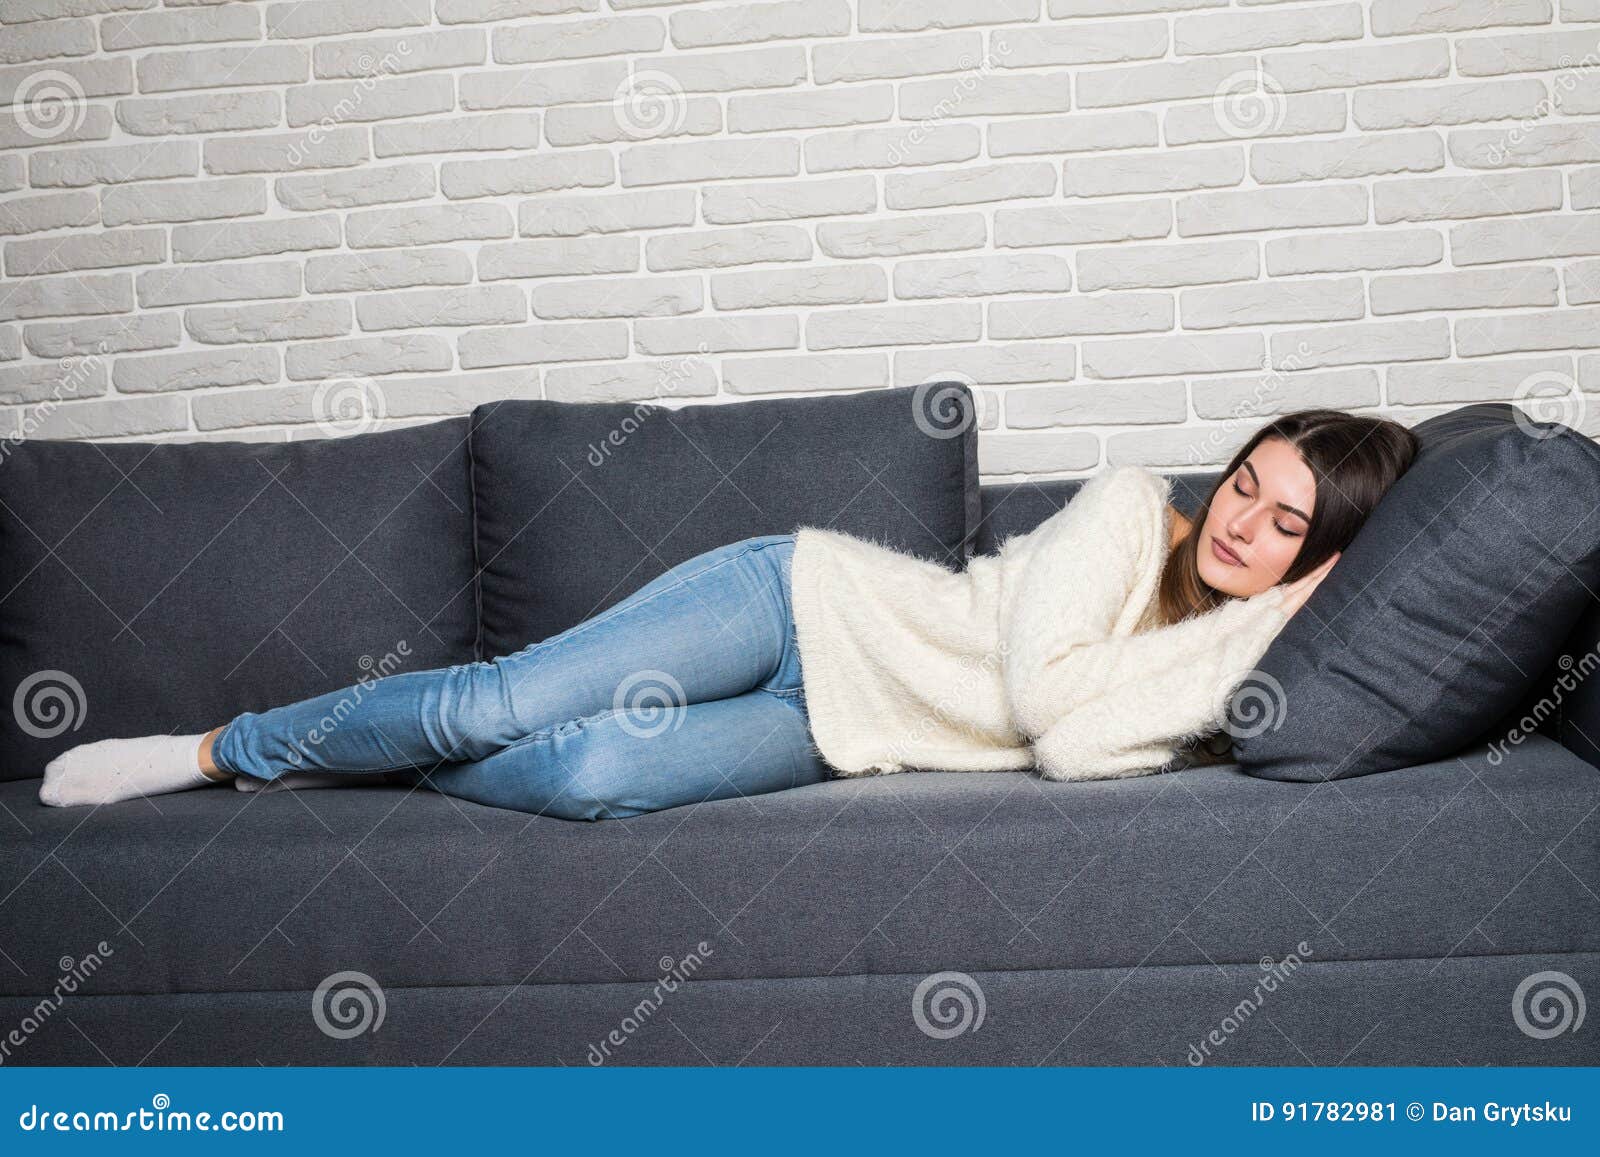 Beautiful Young Woman Sleeping On Sofa Indoors At Home Stock Image